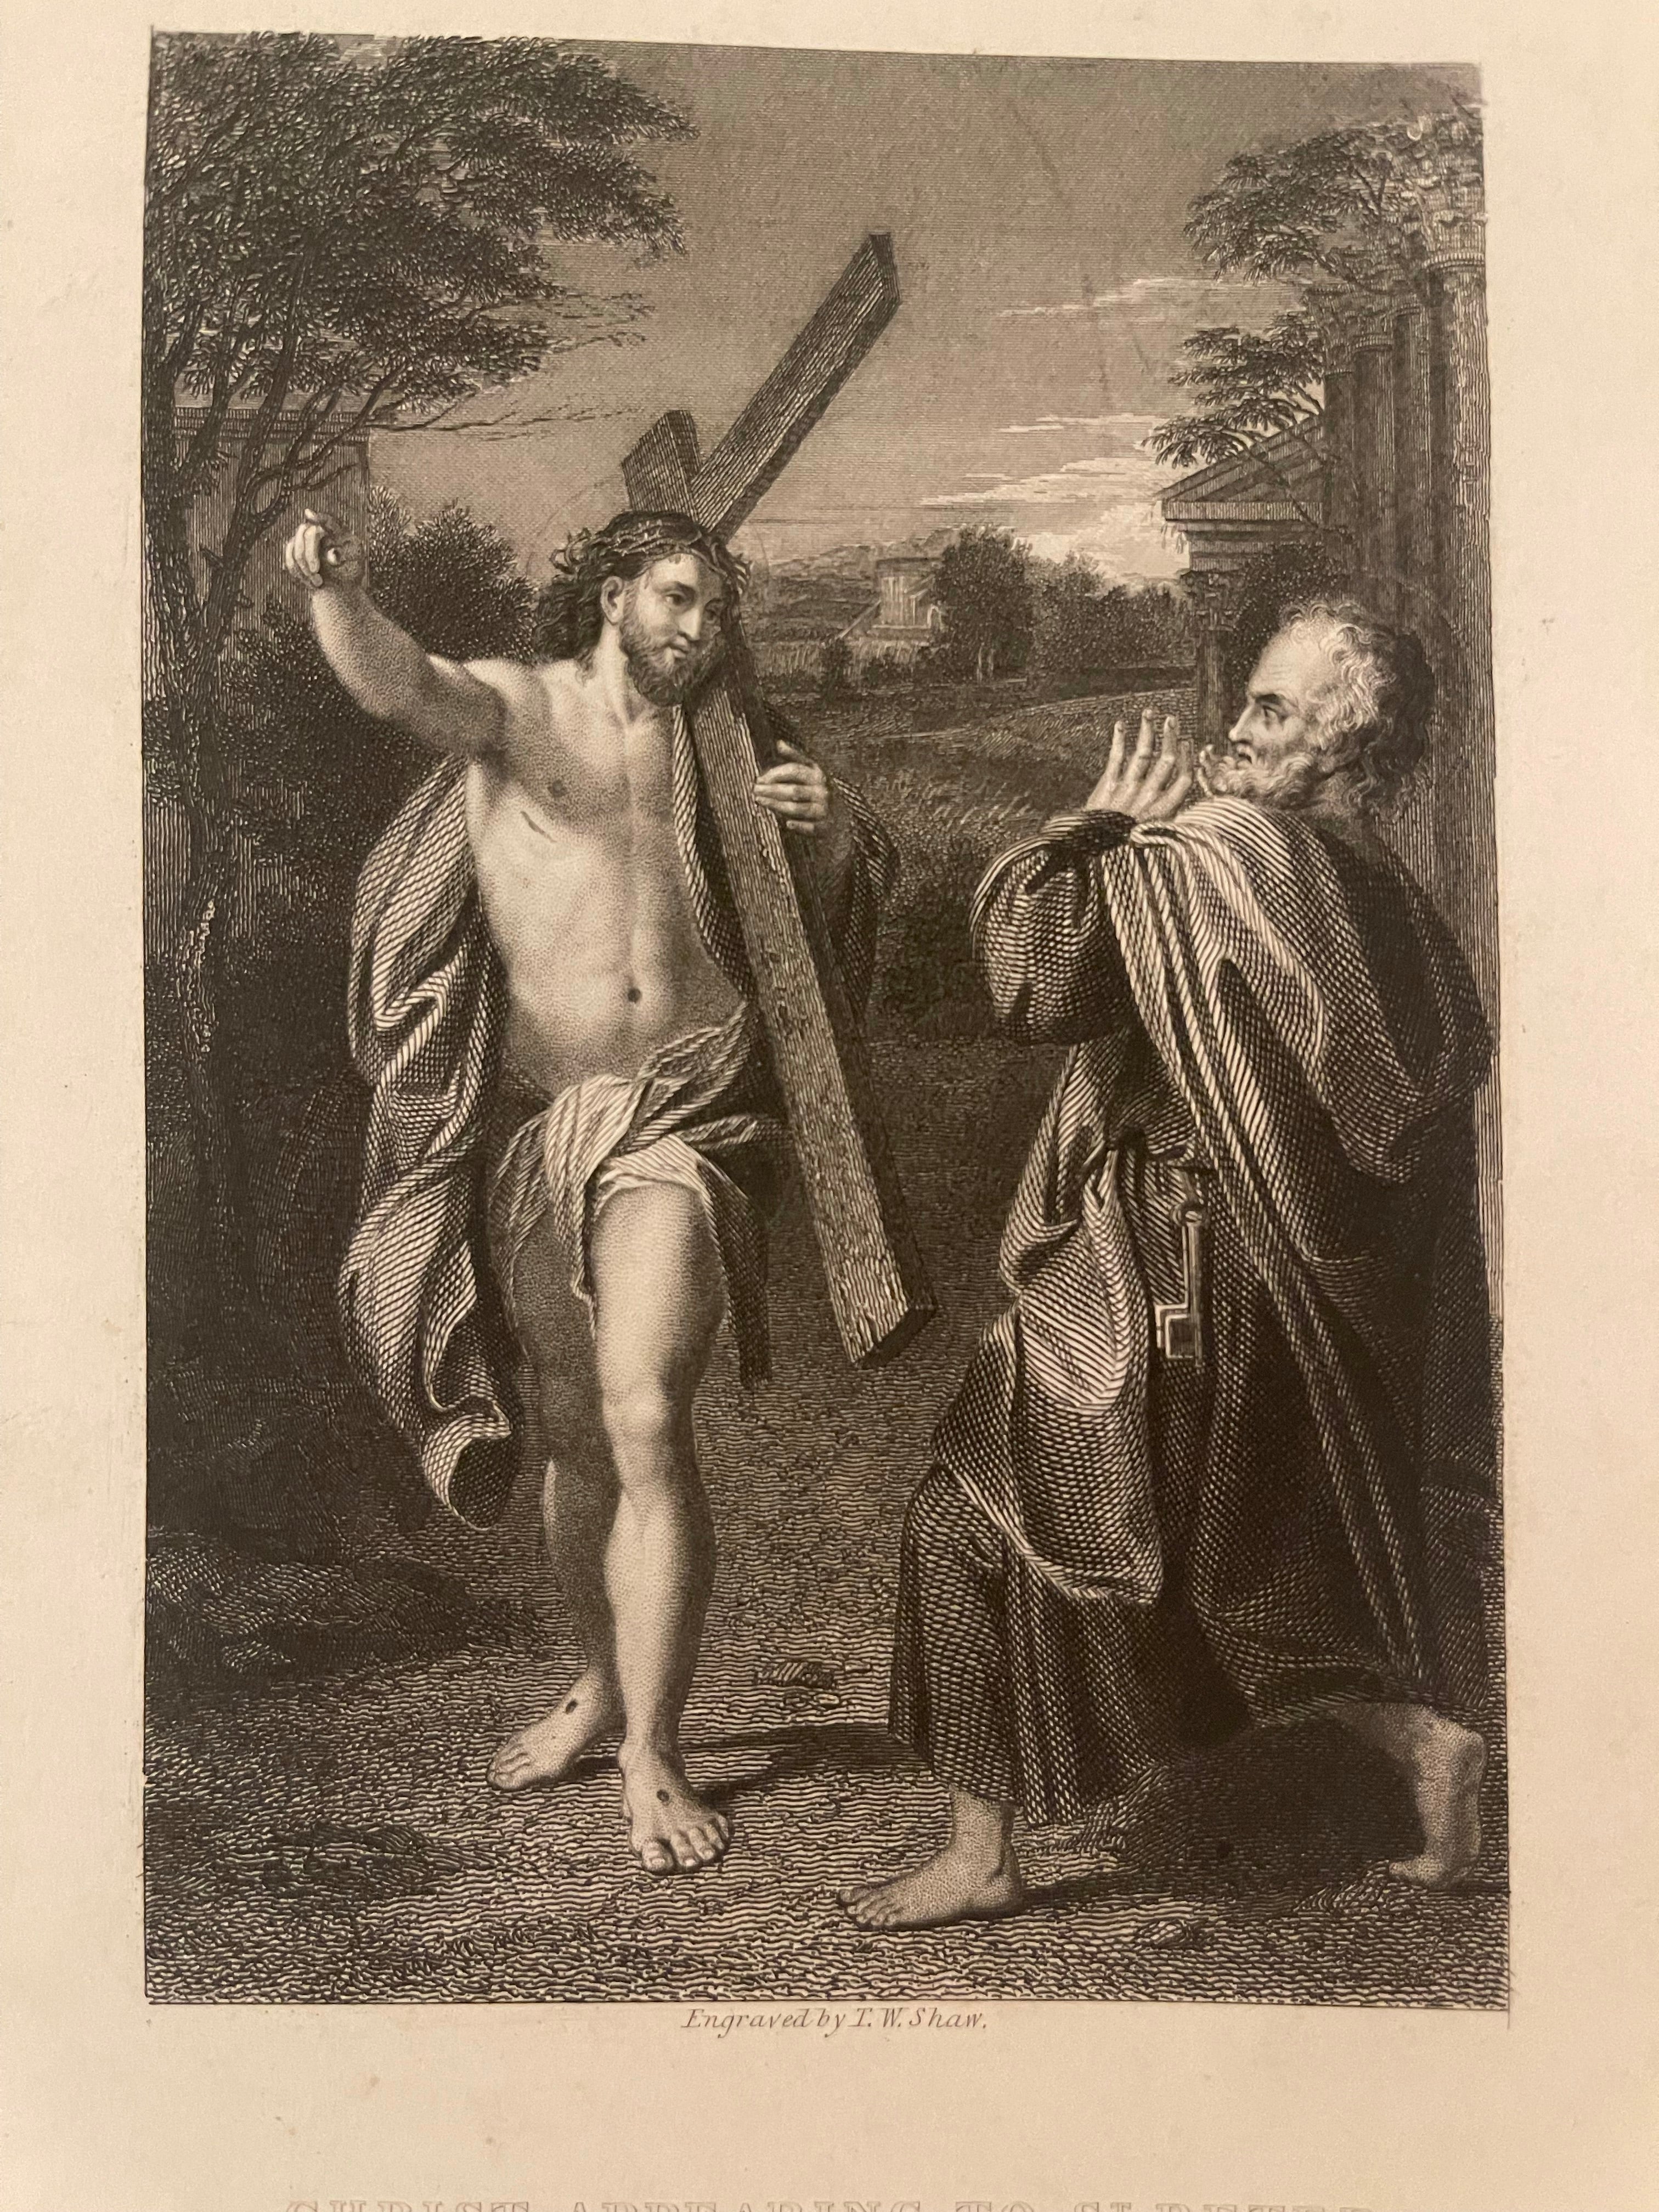 Antique Engraving | Christ Appearing to Saint Peter | “Quo Vadis” by T. W. Shaw after Annibale Carracci